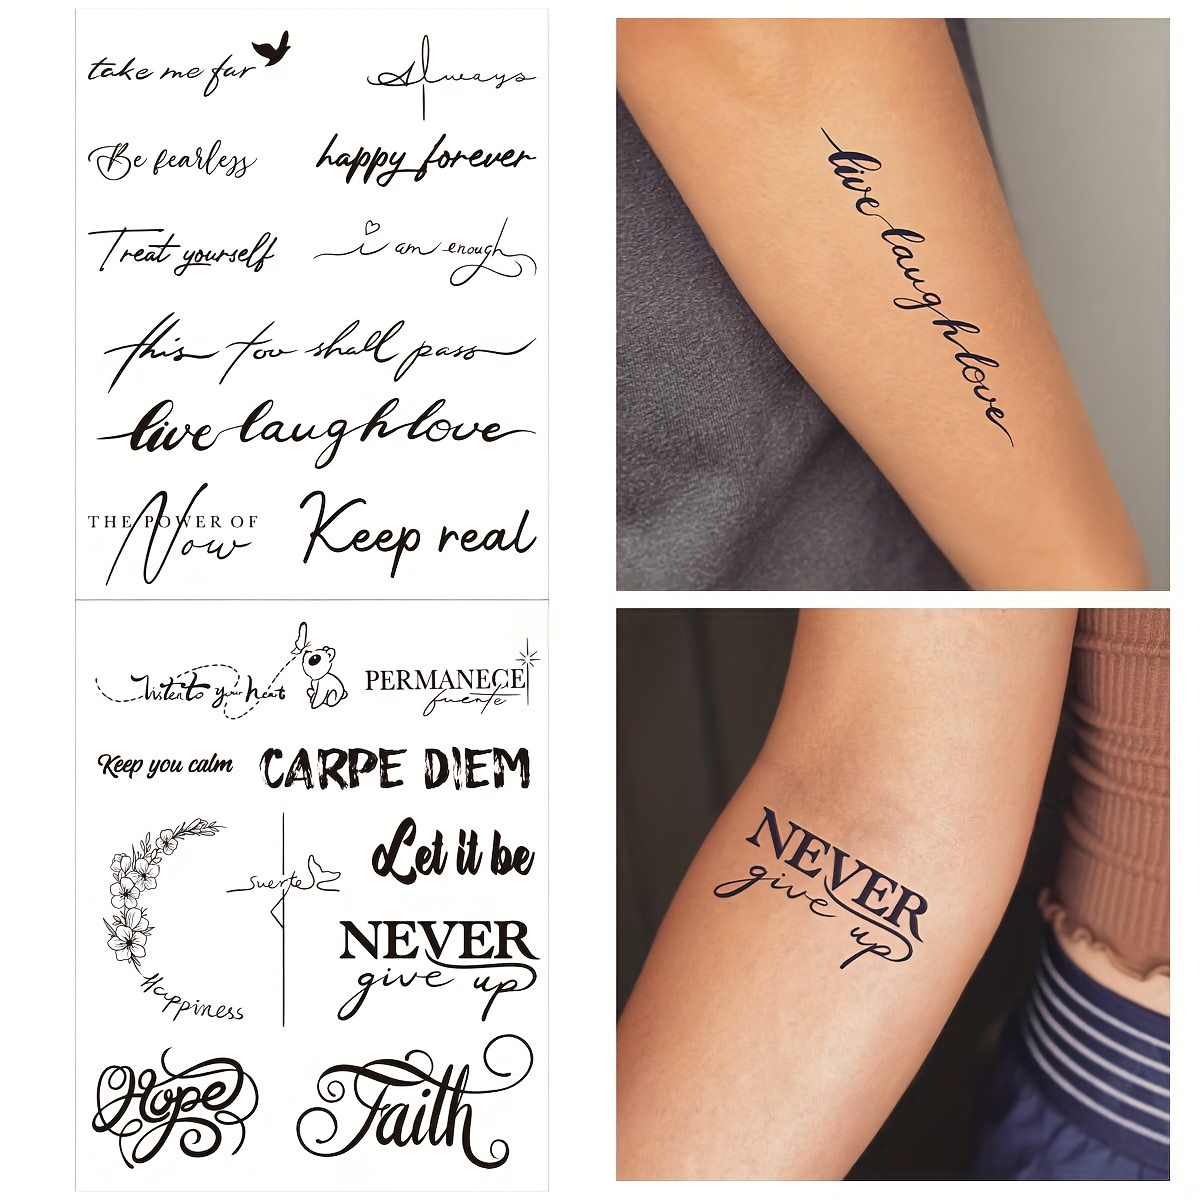 

Inspirational English Phrase Temporary Tattoos (2-pack) - Small, Fresh, Stylish, Waterproof Alphabet Letter Tattoo Stickers - Motivational Words And Quotes Body Art - Multiple Shapes And Designs